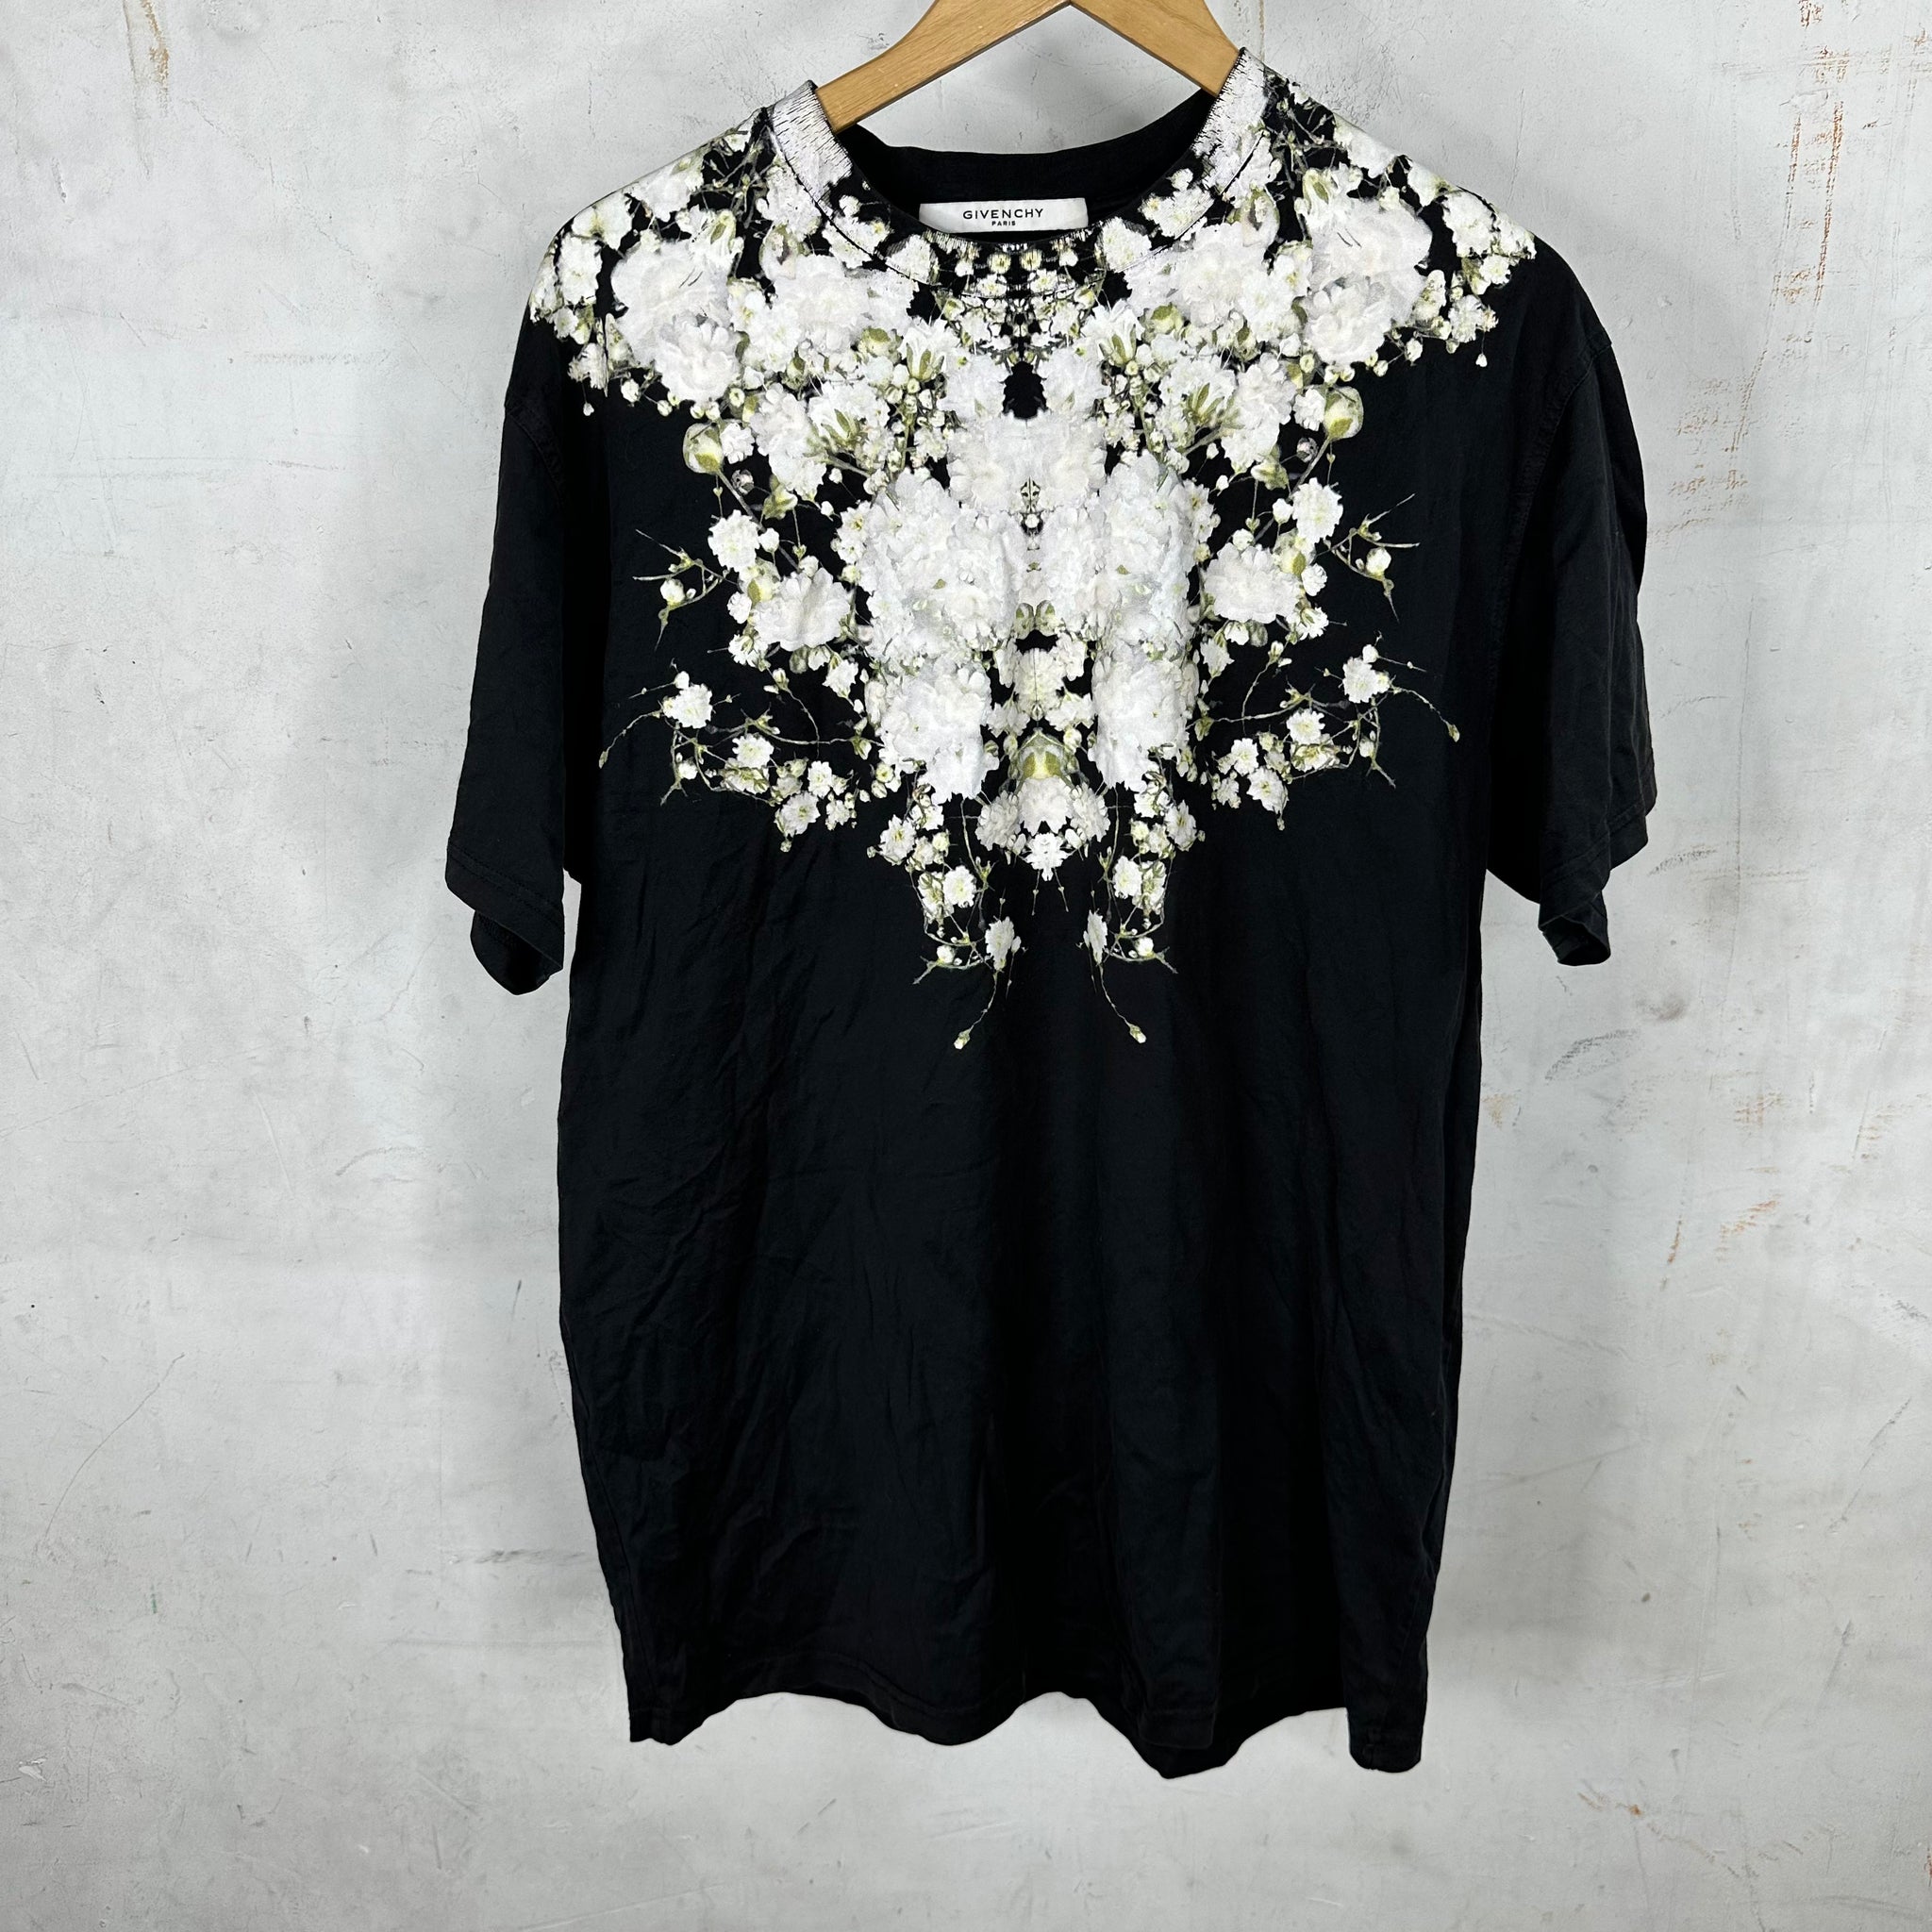 Givenchy Floral Bomb T-Shirt